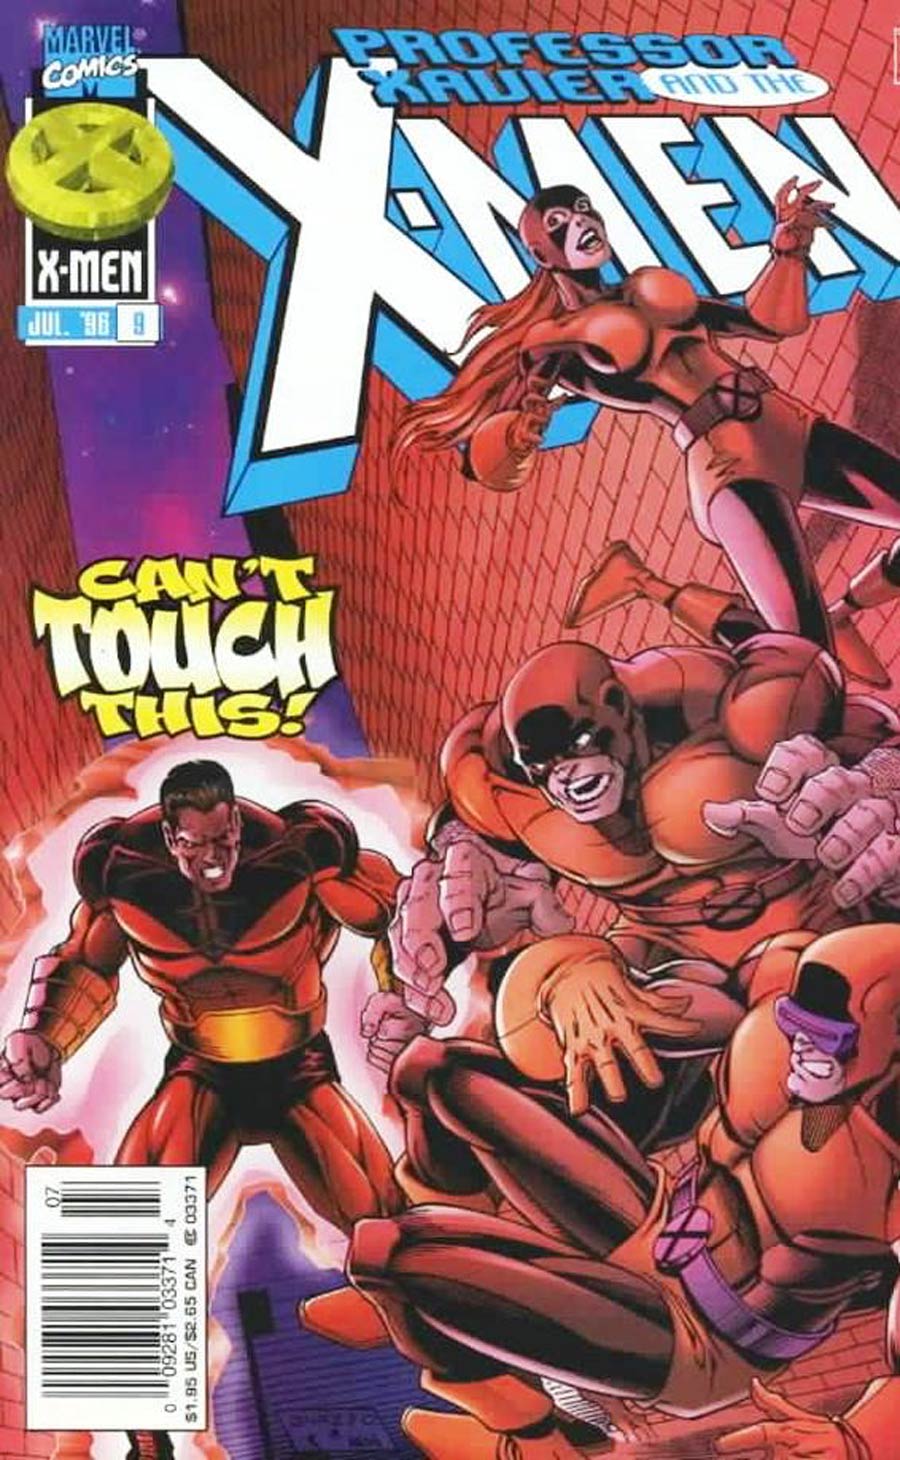 Professor Xavier And The X-Men #9 Cover C Flipbook With Kool-Aid